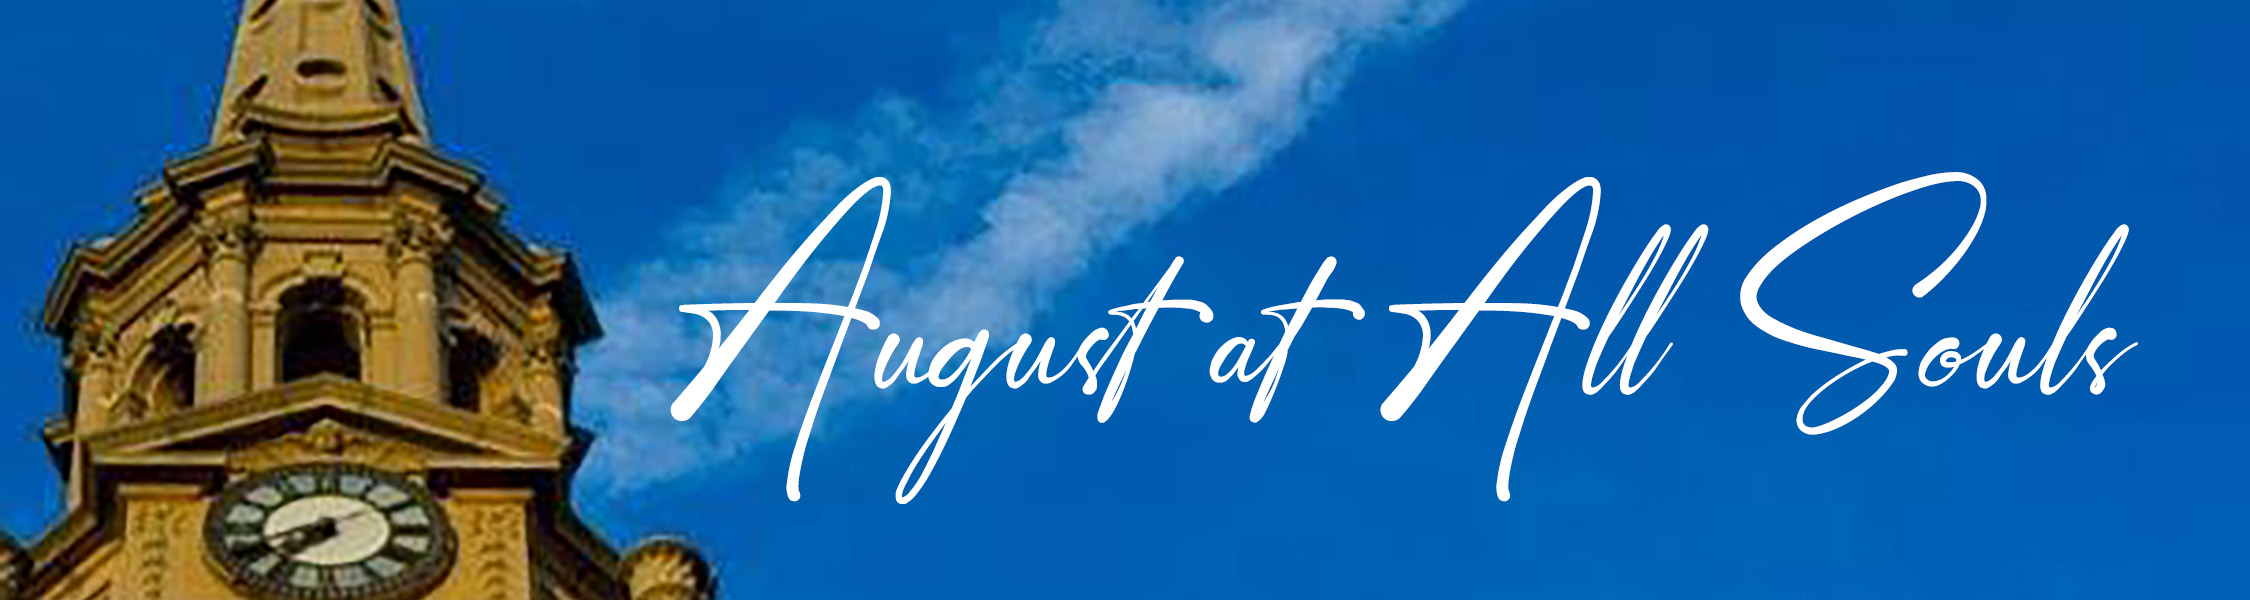 August at All Souls